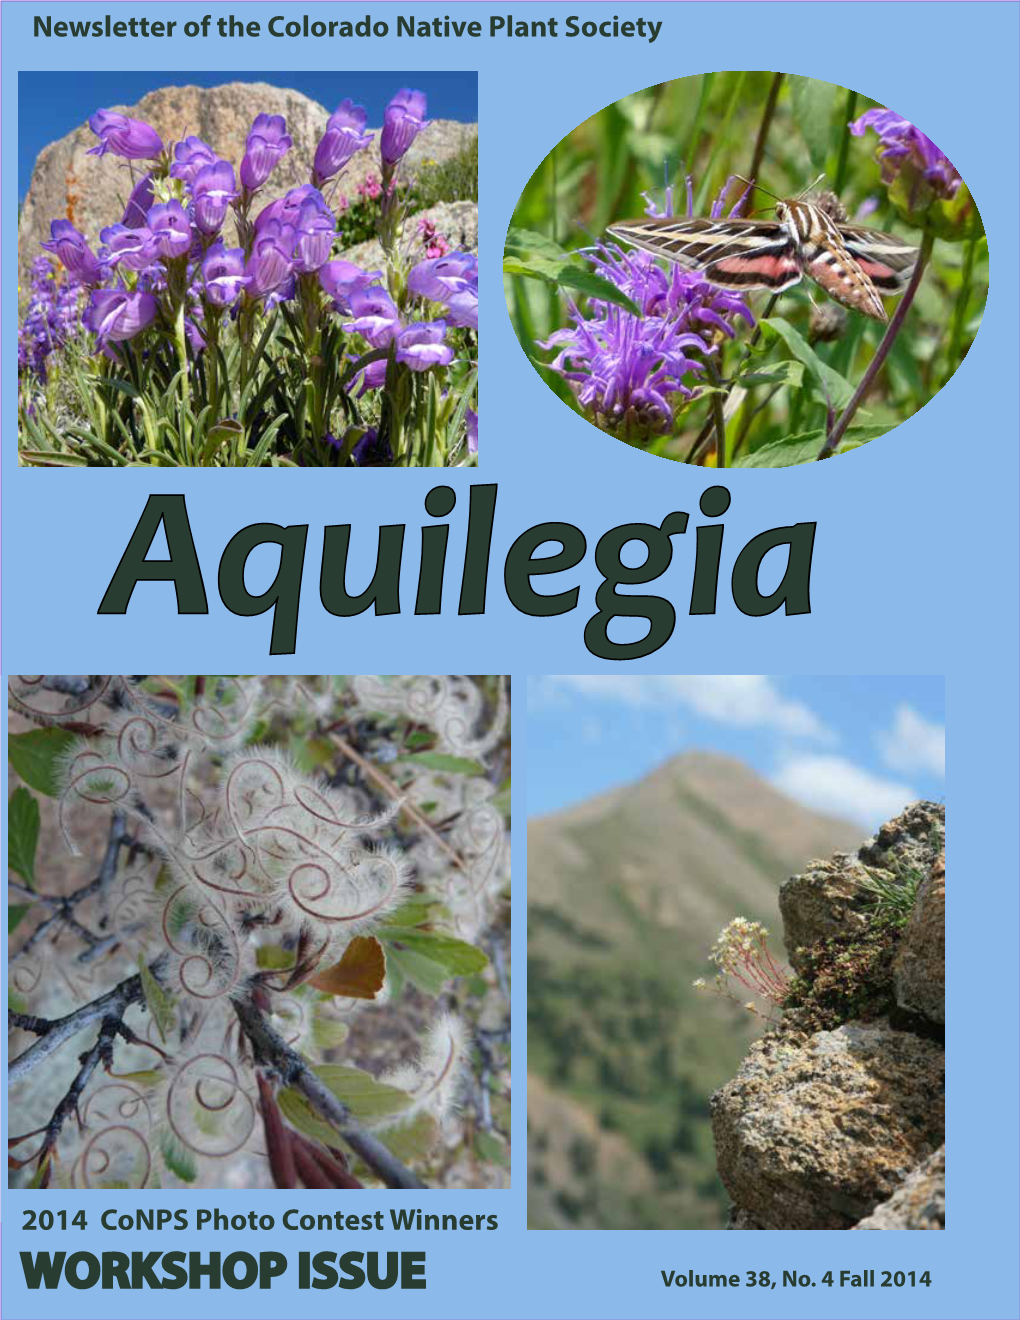 Workshop Issue of Aquilegia and Conps’ New Workshop Chair, Ronda Koski, Has Done an Excellent Job of Arranging a Number of Interesting Workshops Throughout the State